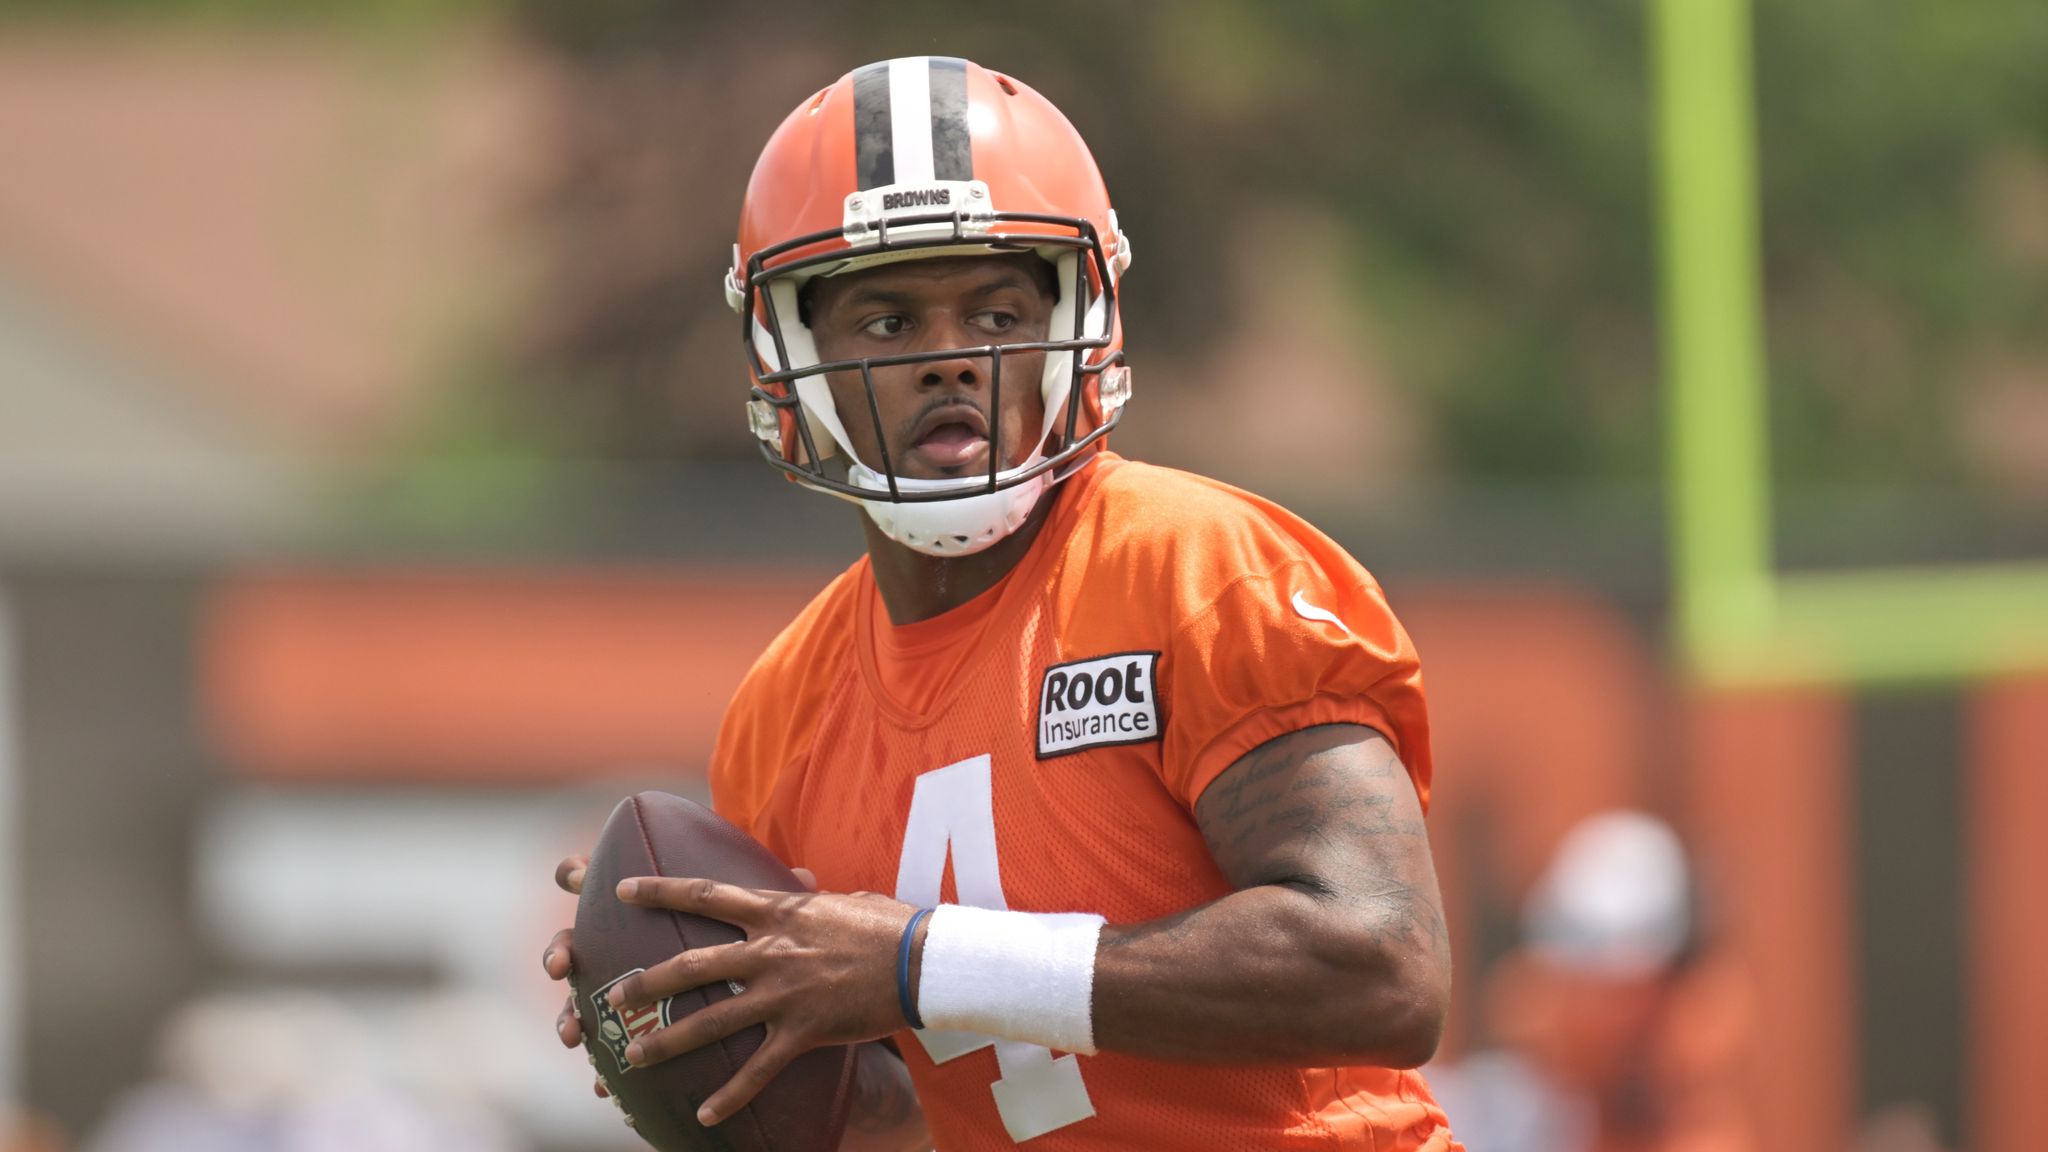 Texans brace for Deshaun Watsons return with Browns  MyWabashValleycom